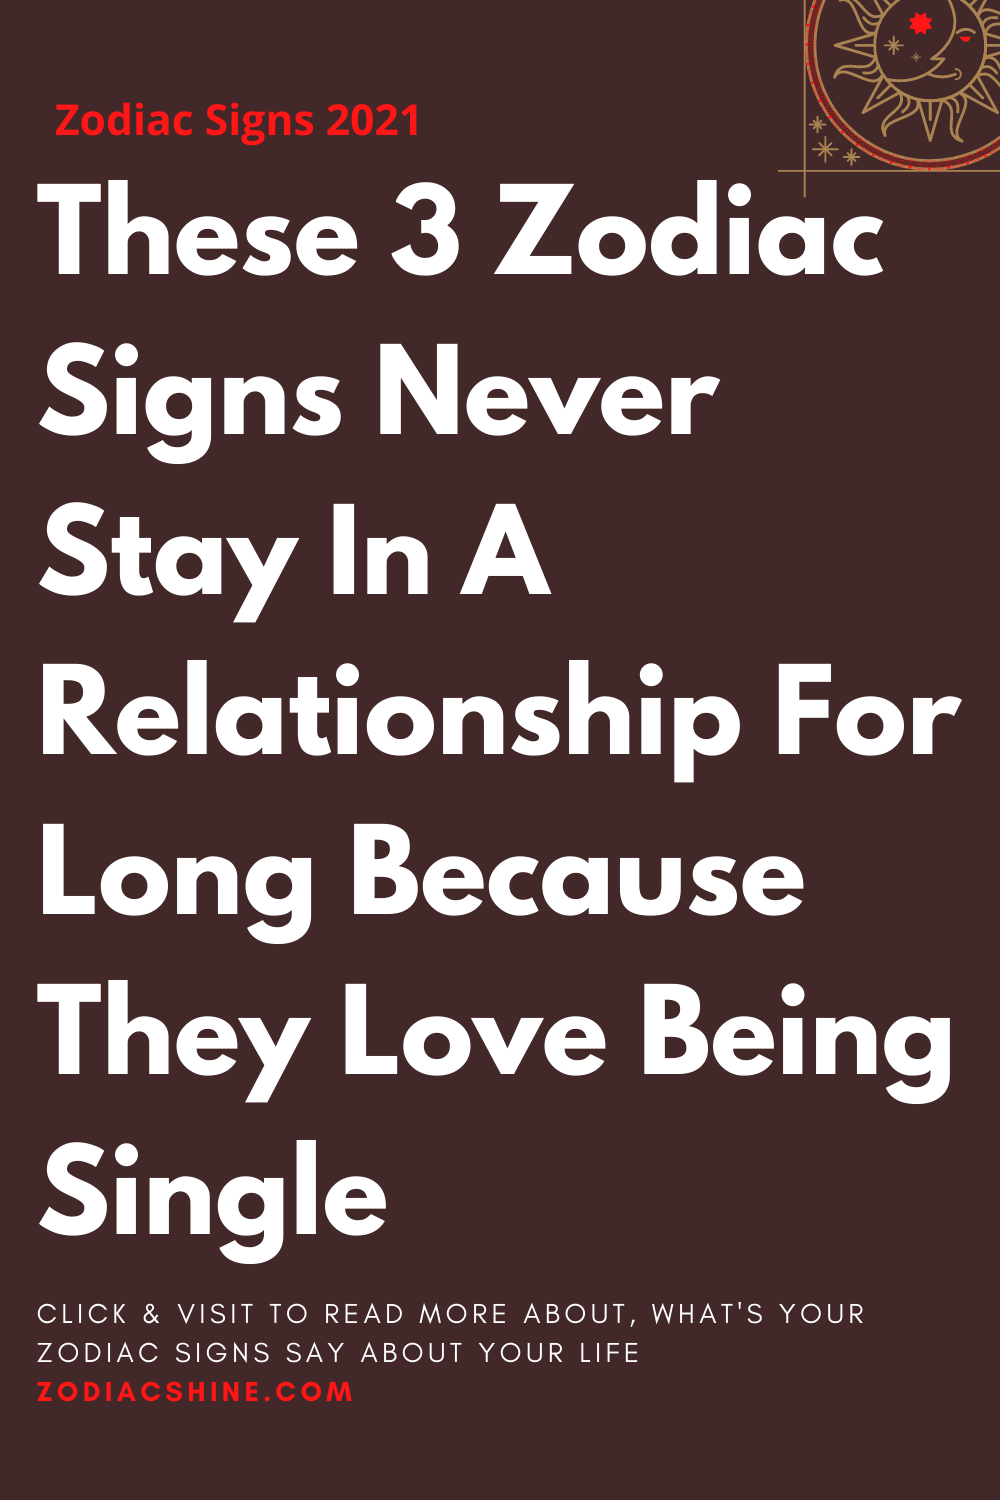 These 3 Zodiac Signs Never Stay In A Relationship For Long Because They Love Being Single